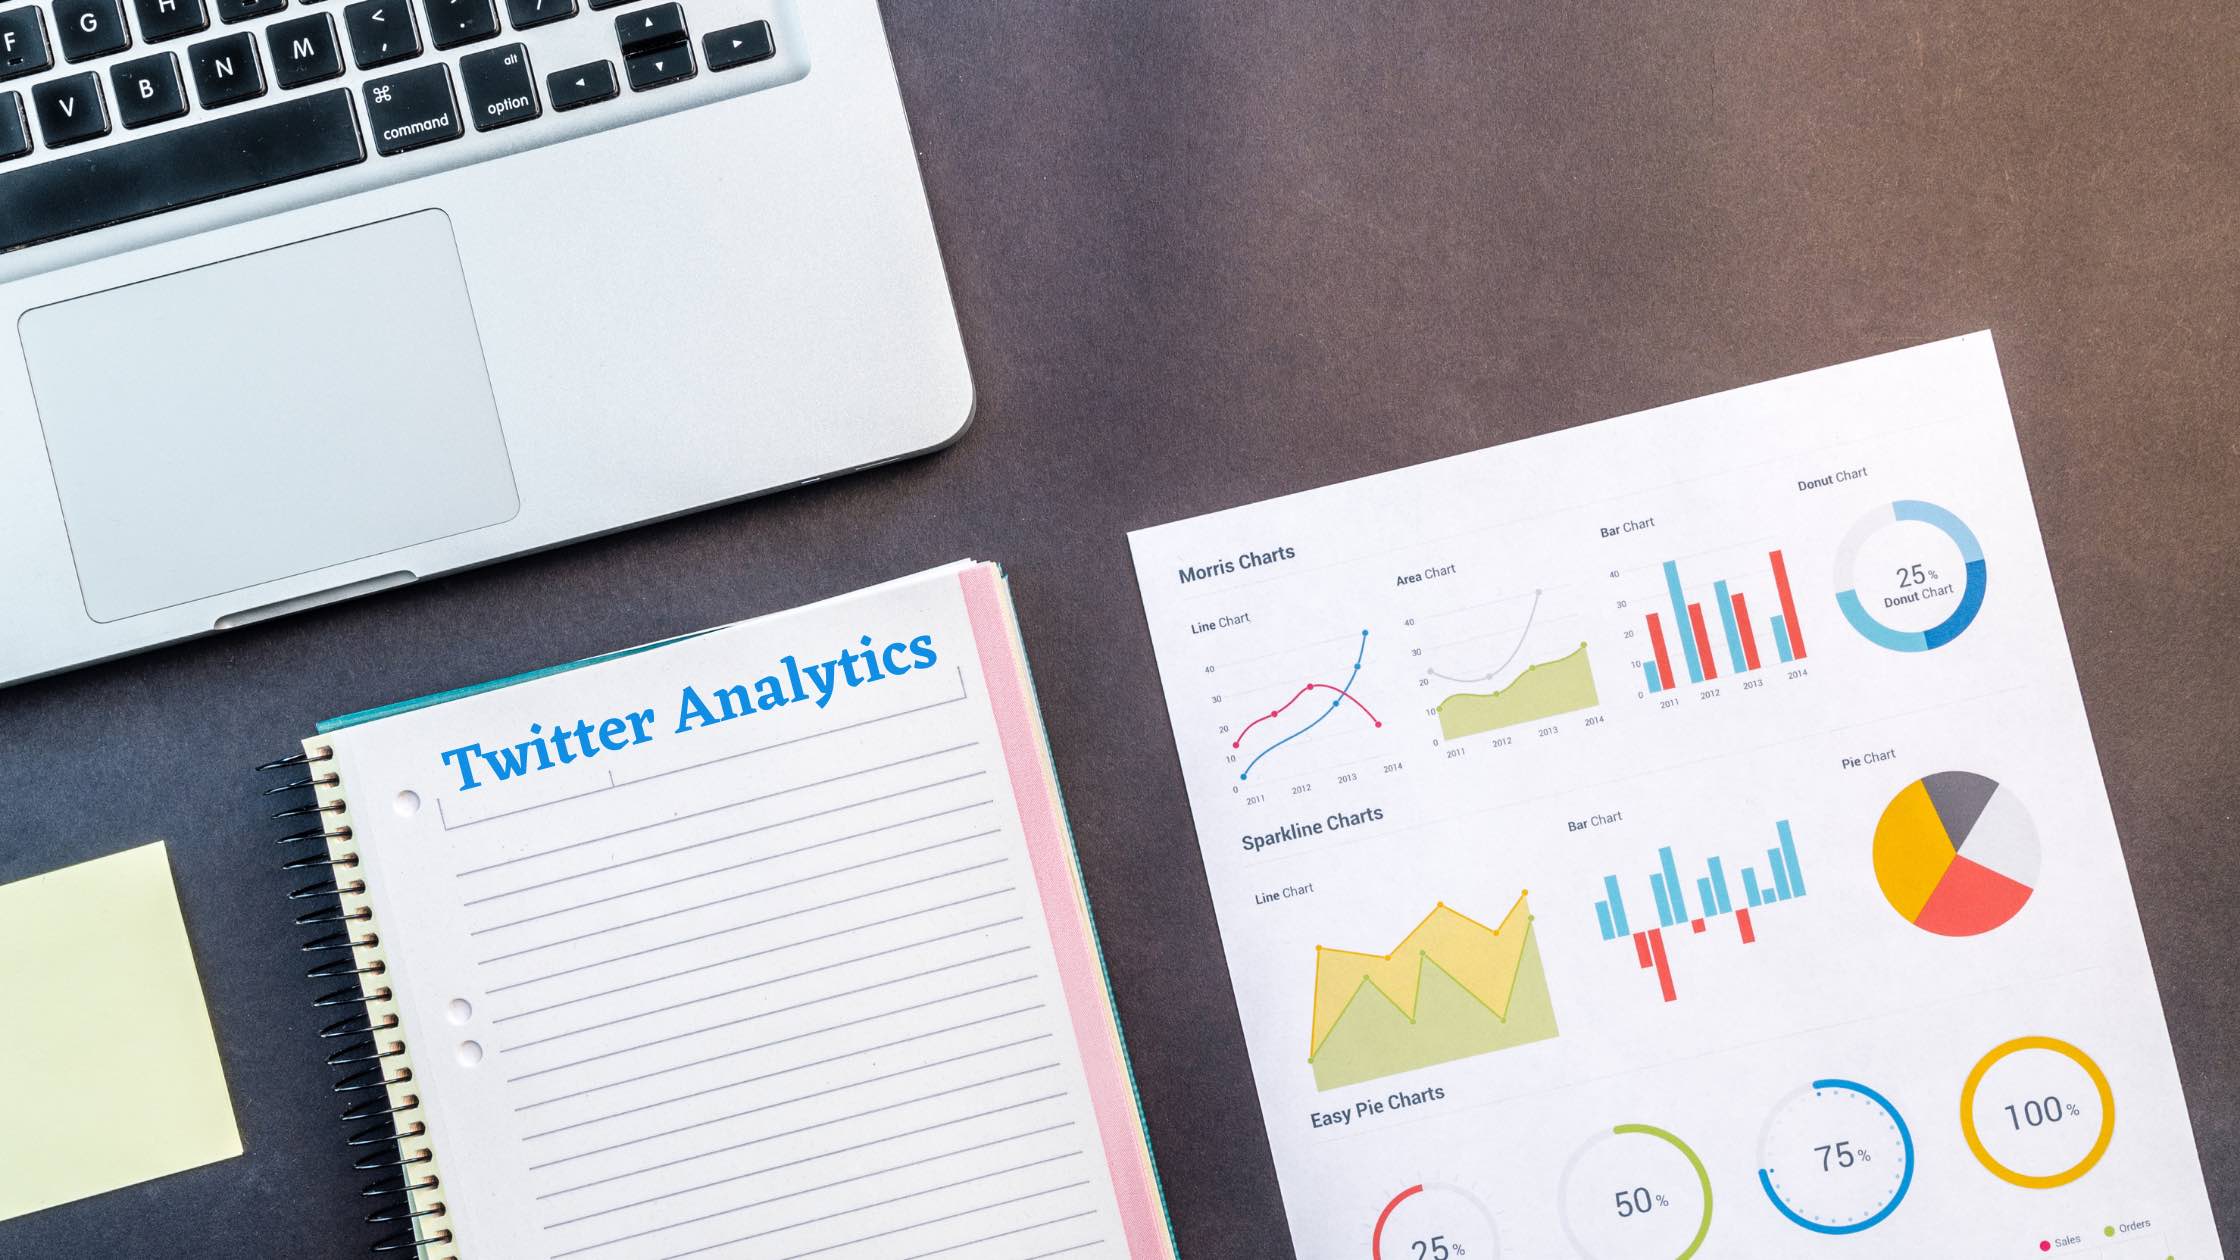 Useful Insights You can Learn from Twitter Analytics